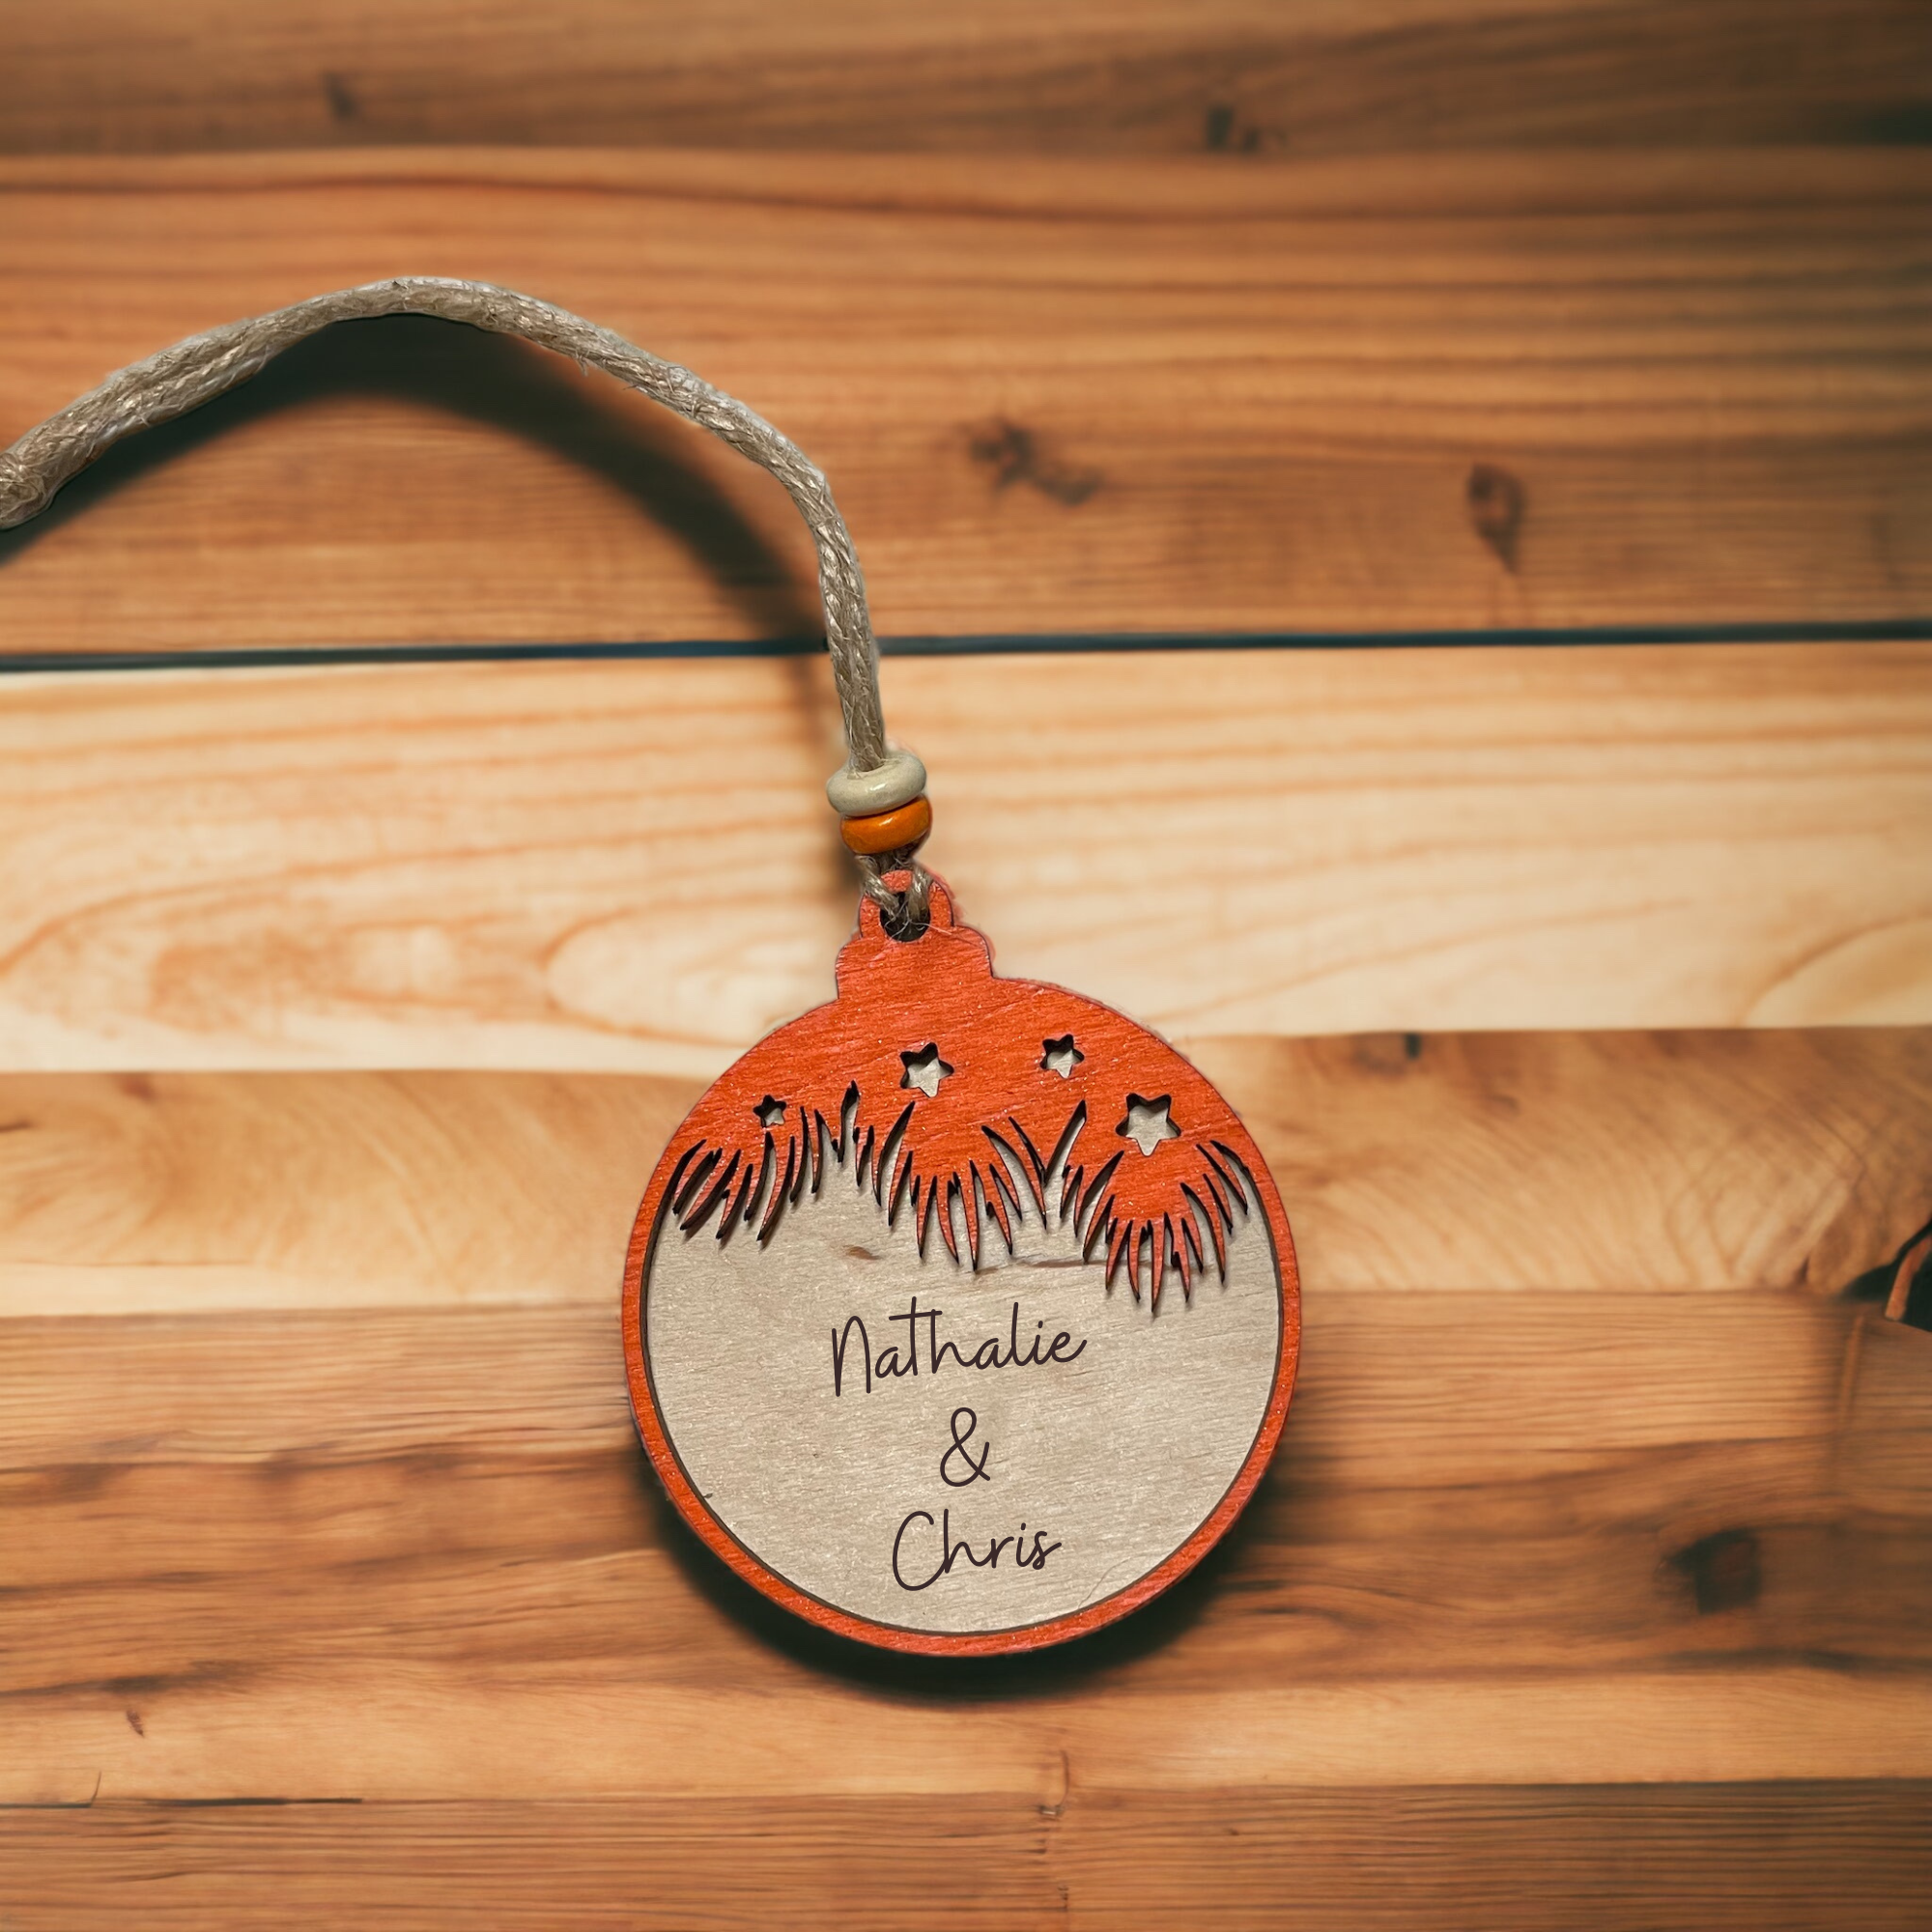 Customizable Wooden Christmas Ornaments - Personalize with Names or Pictures